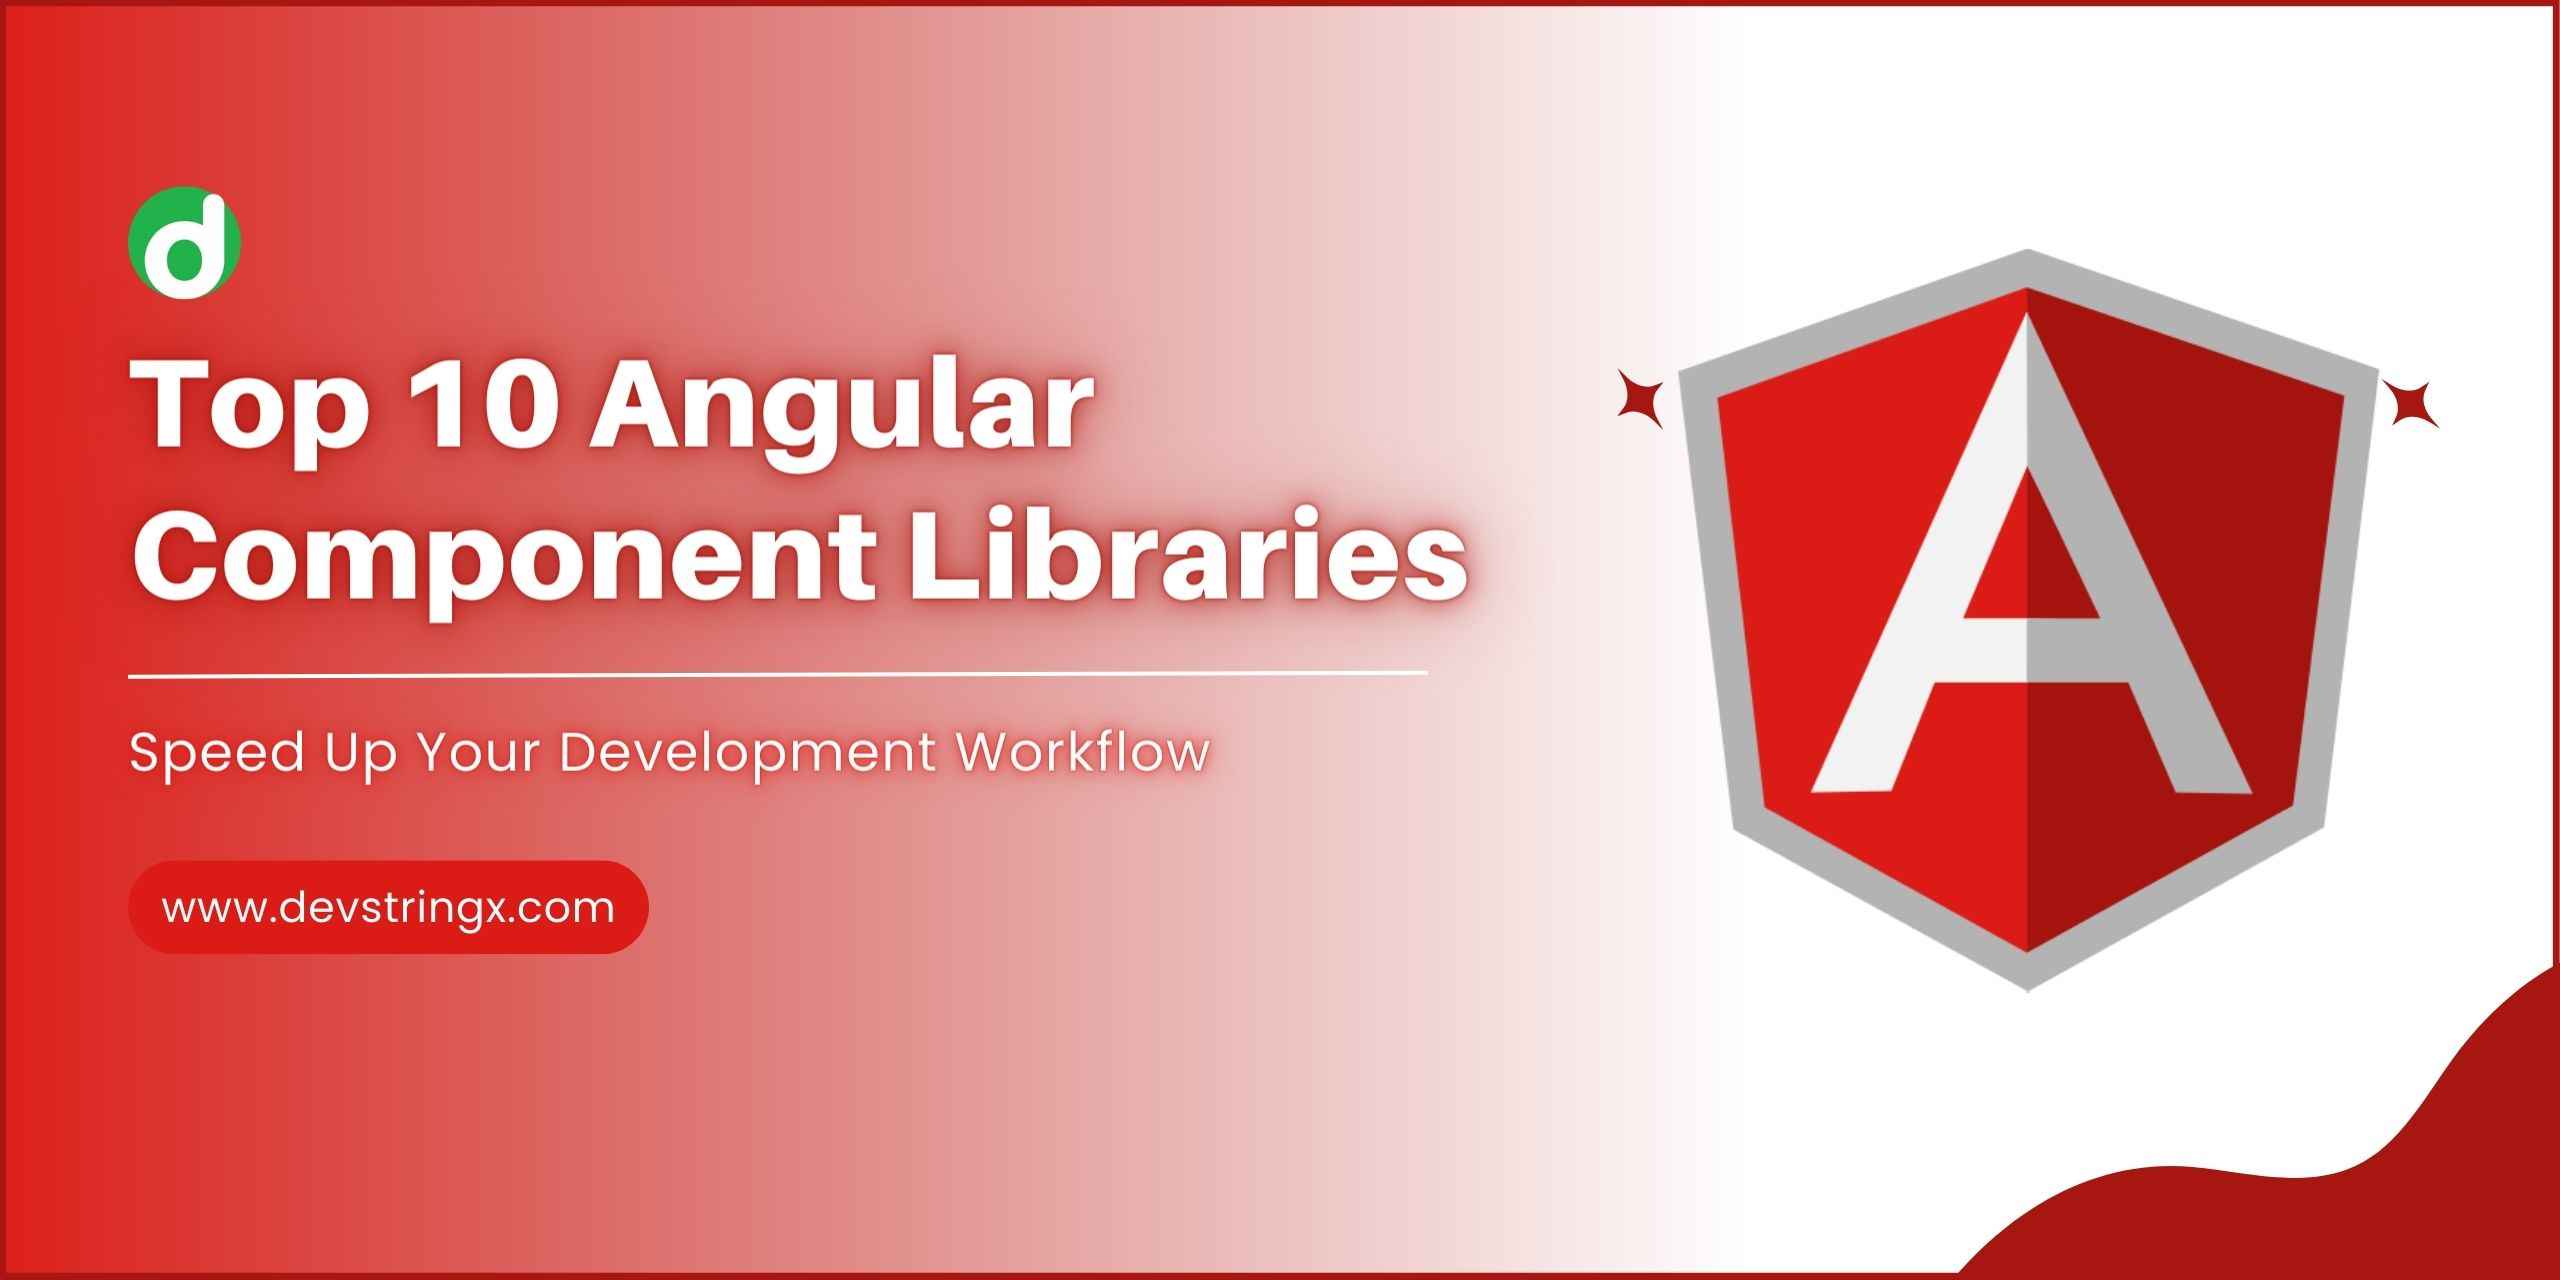 Feature image for top Angular Libraries blog